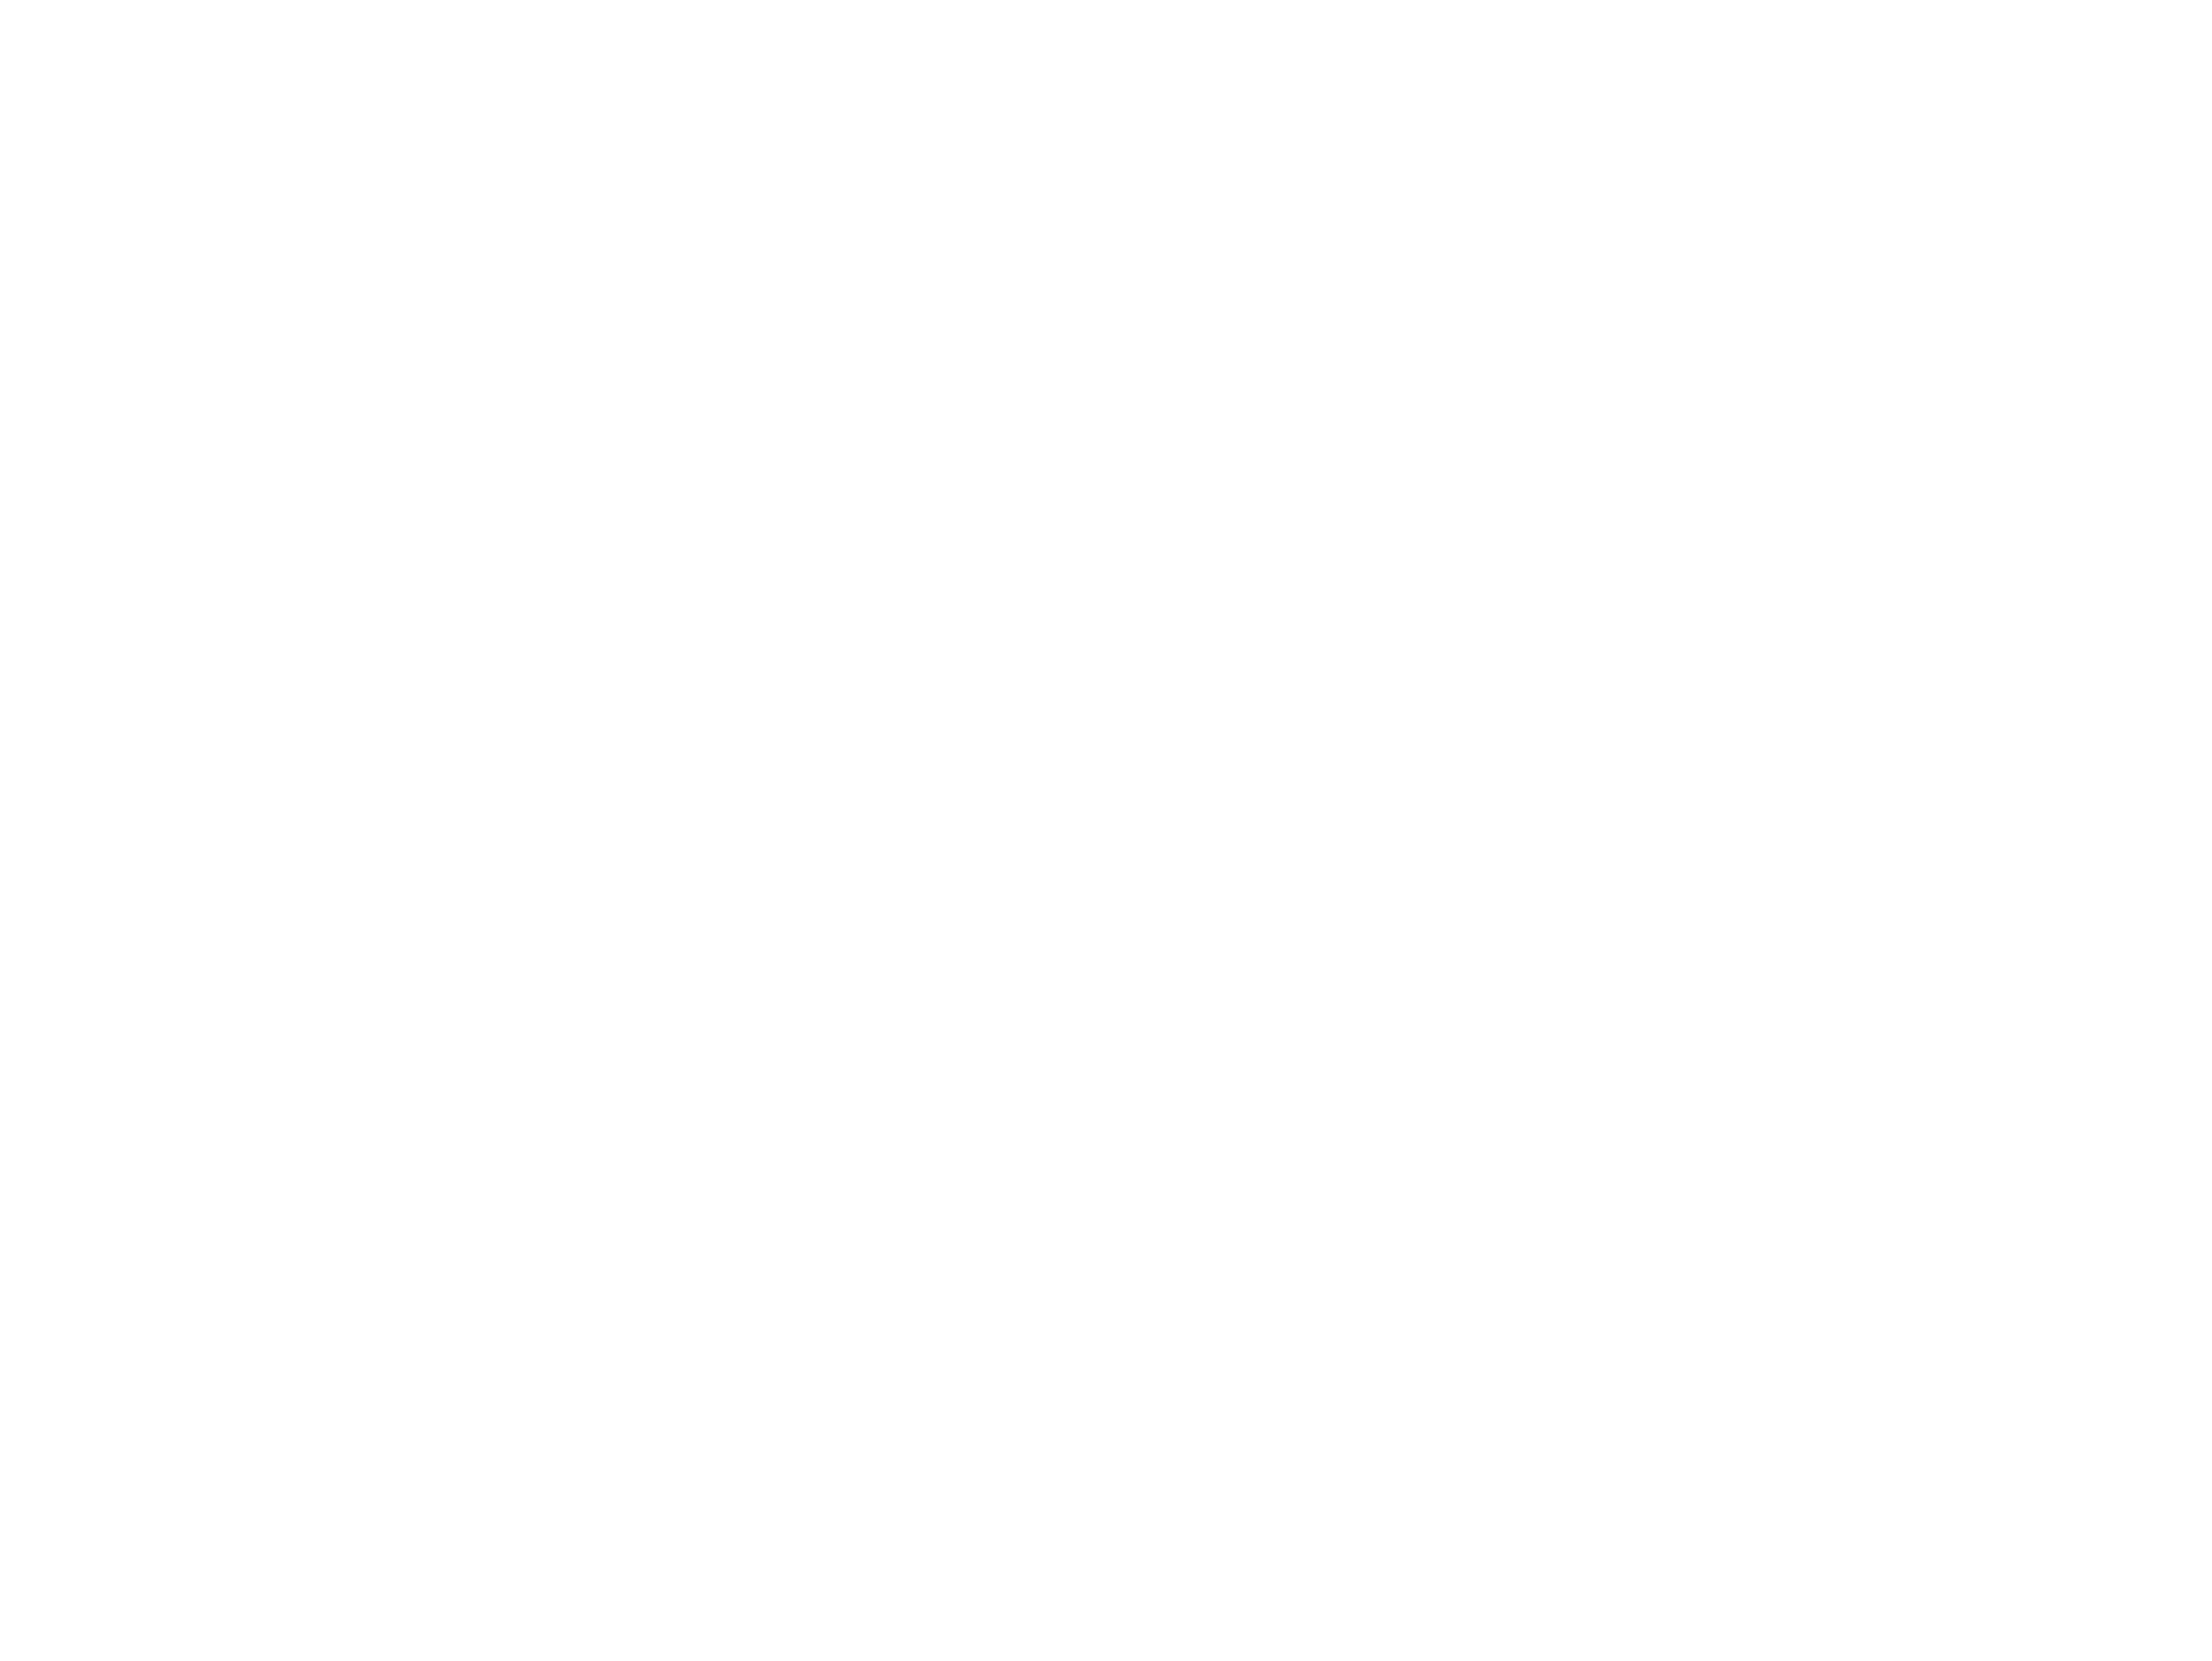 Floating Dots